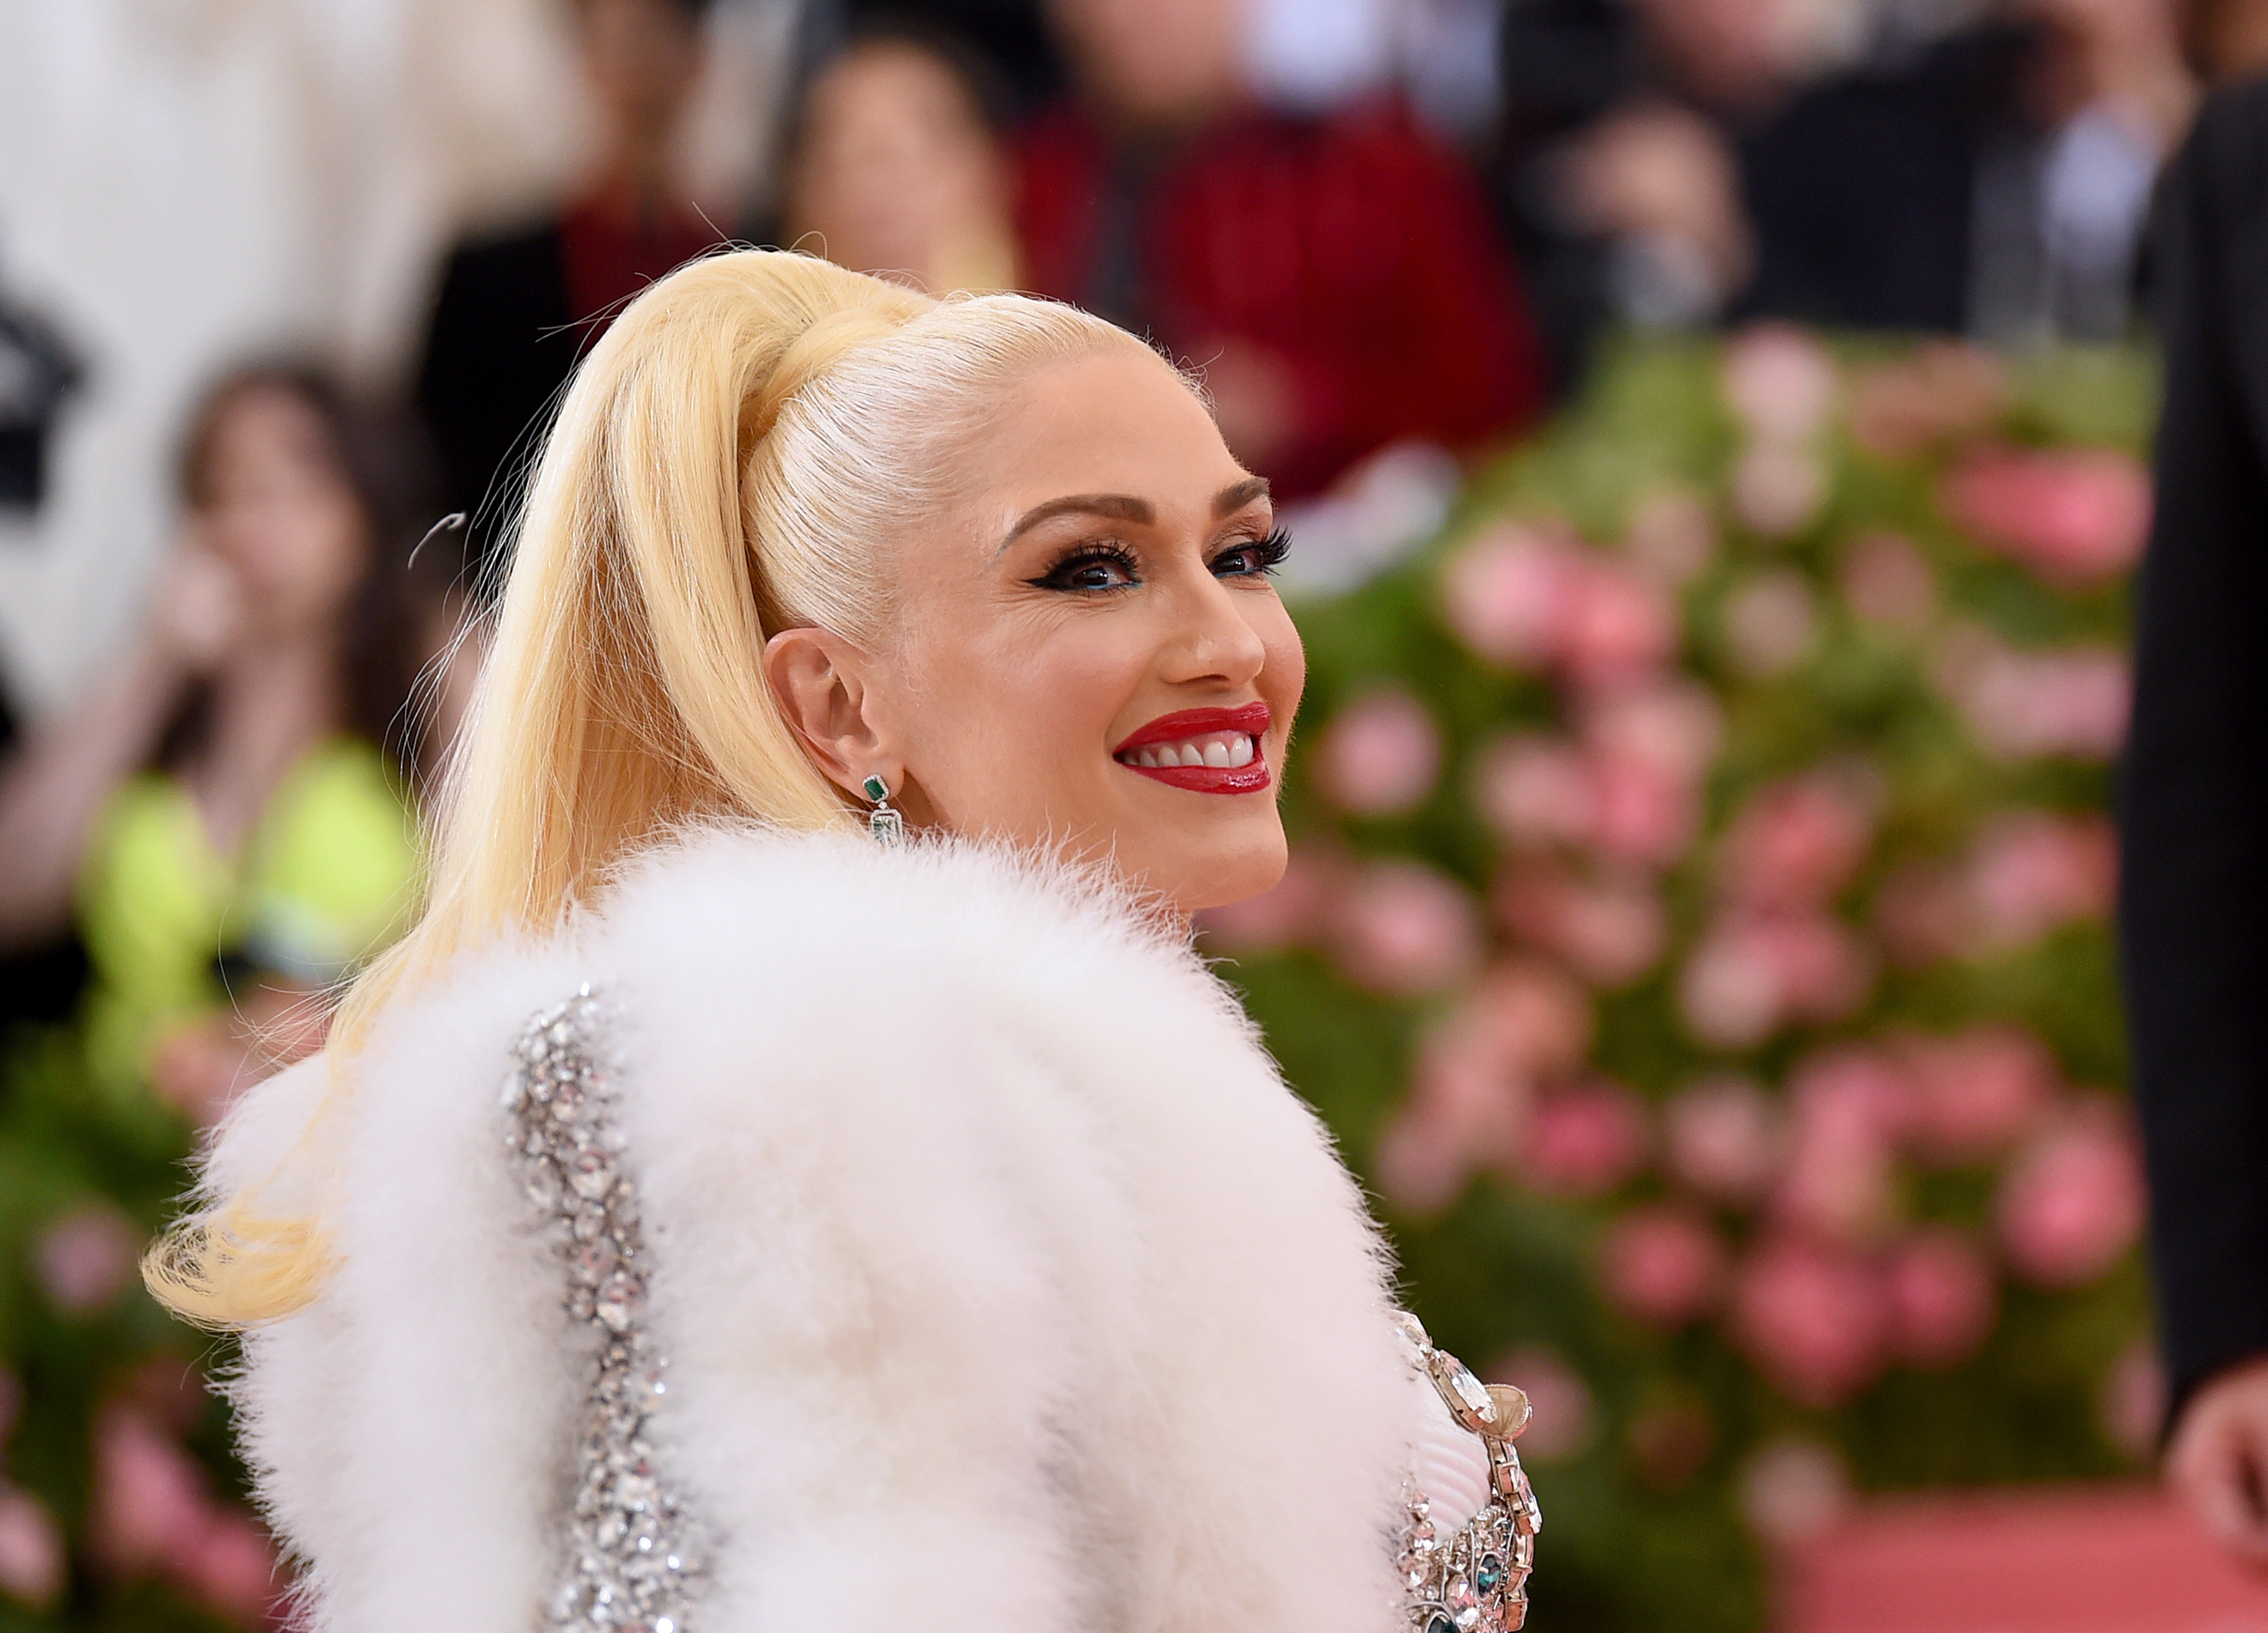 Gwen Stefani at The 2019 Met Gala Celebrating Camp Notes on Fashion at Metropolitan Museum of Art on May 06, 2019 in New York City | Photo: Getty Images